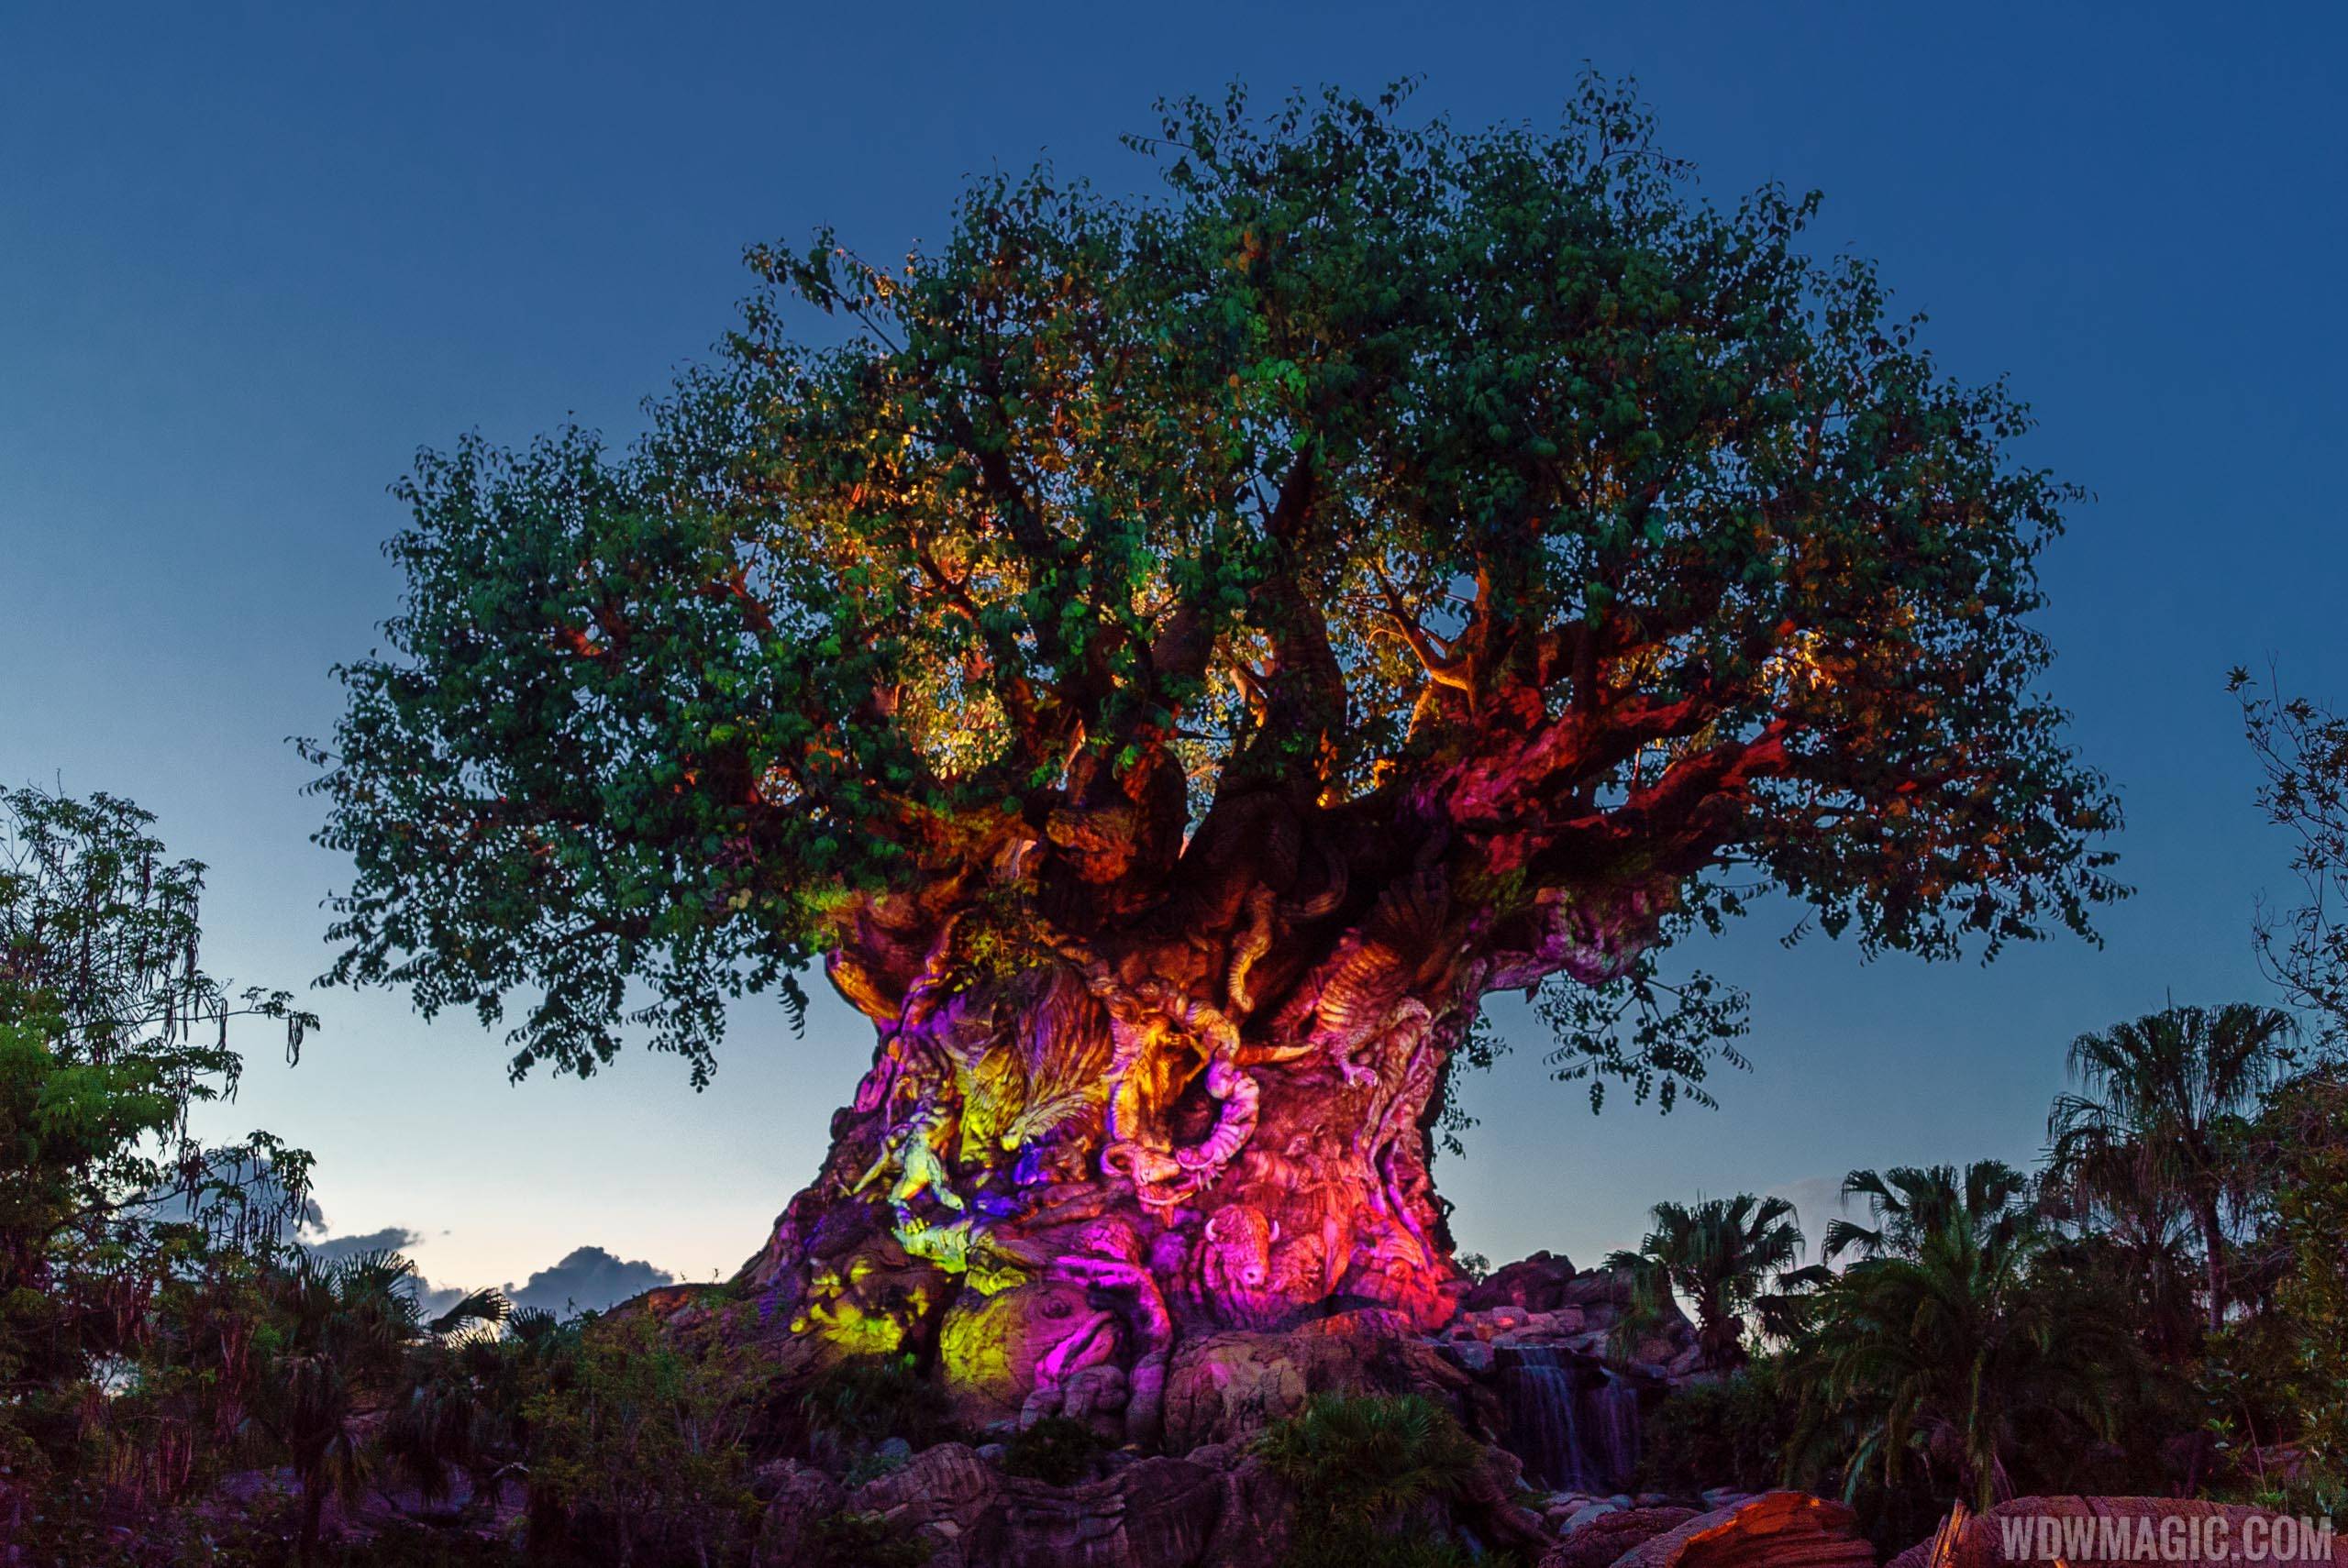 Extended Evening Hours at Disney's Animal Kingdom